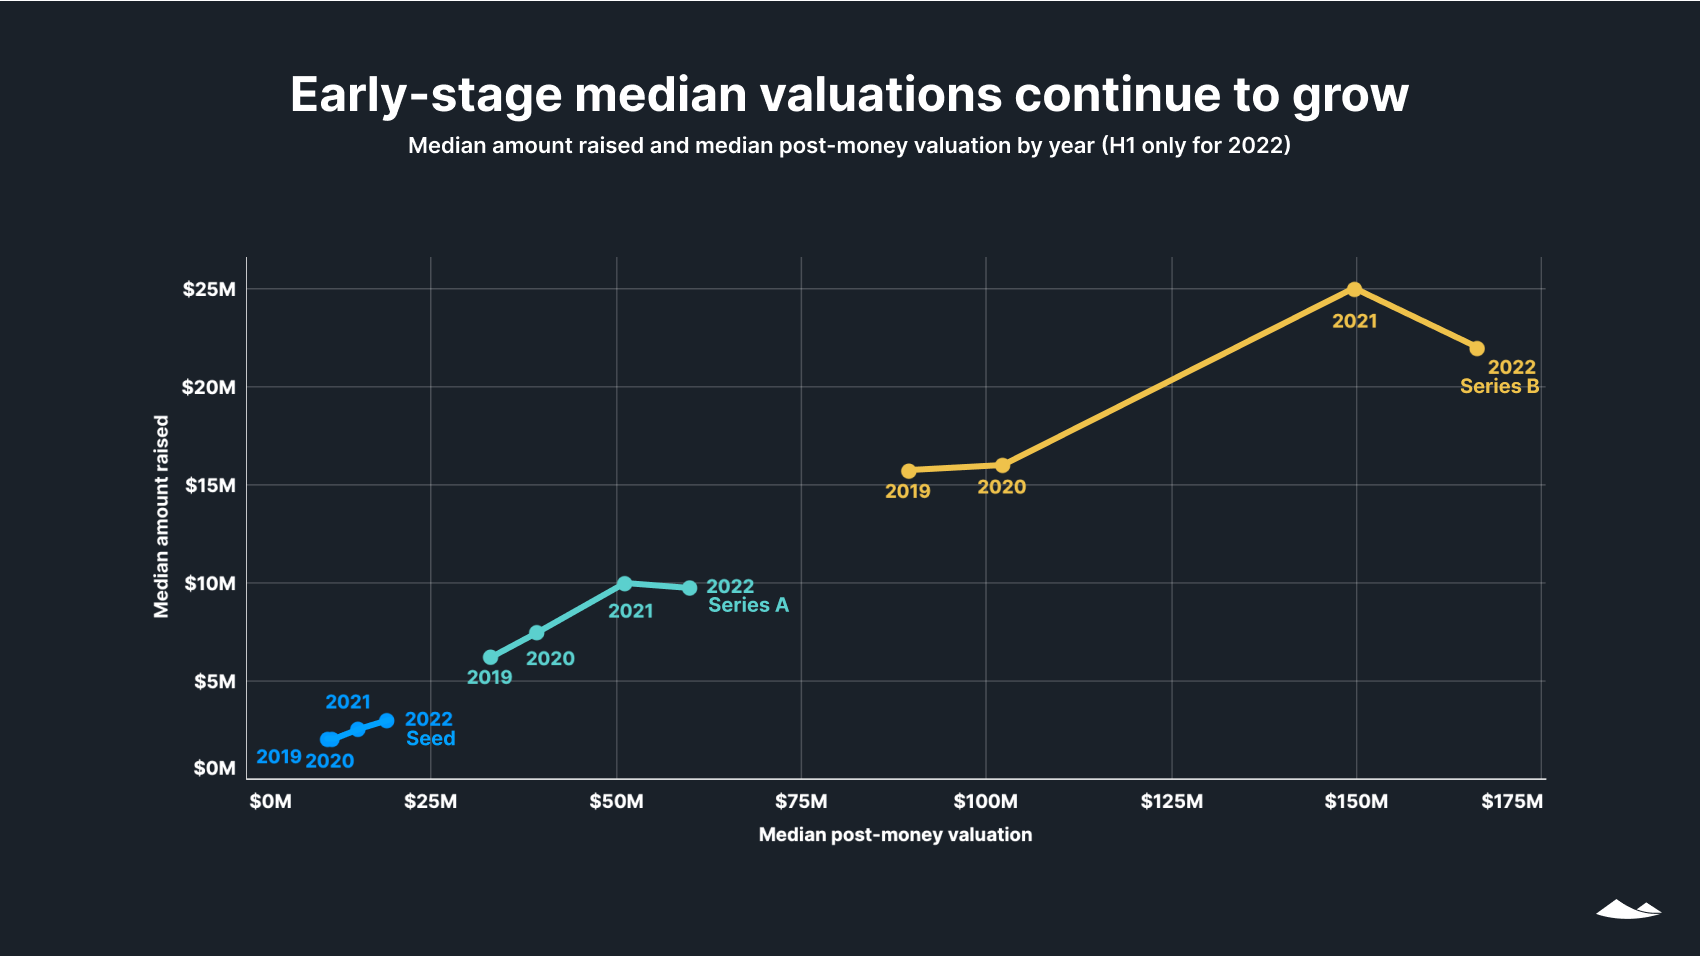 Early-stage valuations continue to grow: Median amount raised and post-money valuation by year (H1 only for 2022)-Line chart